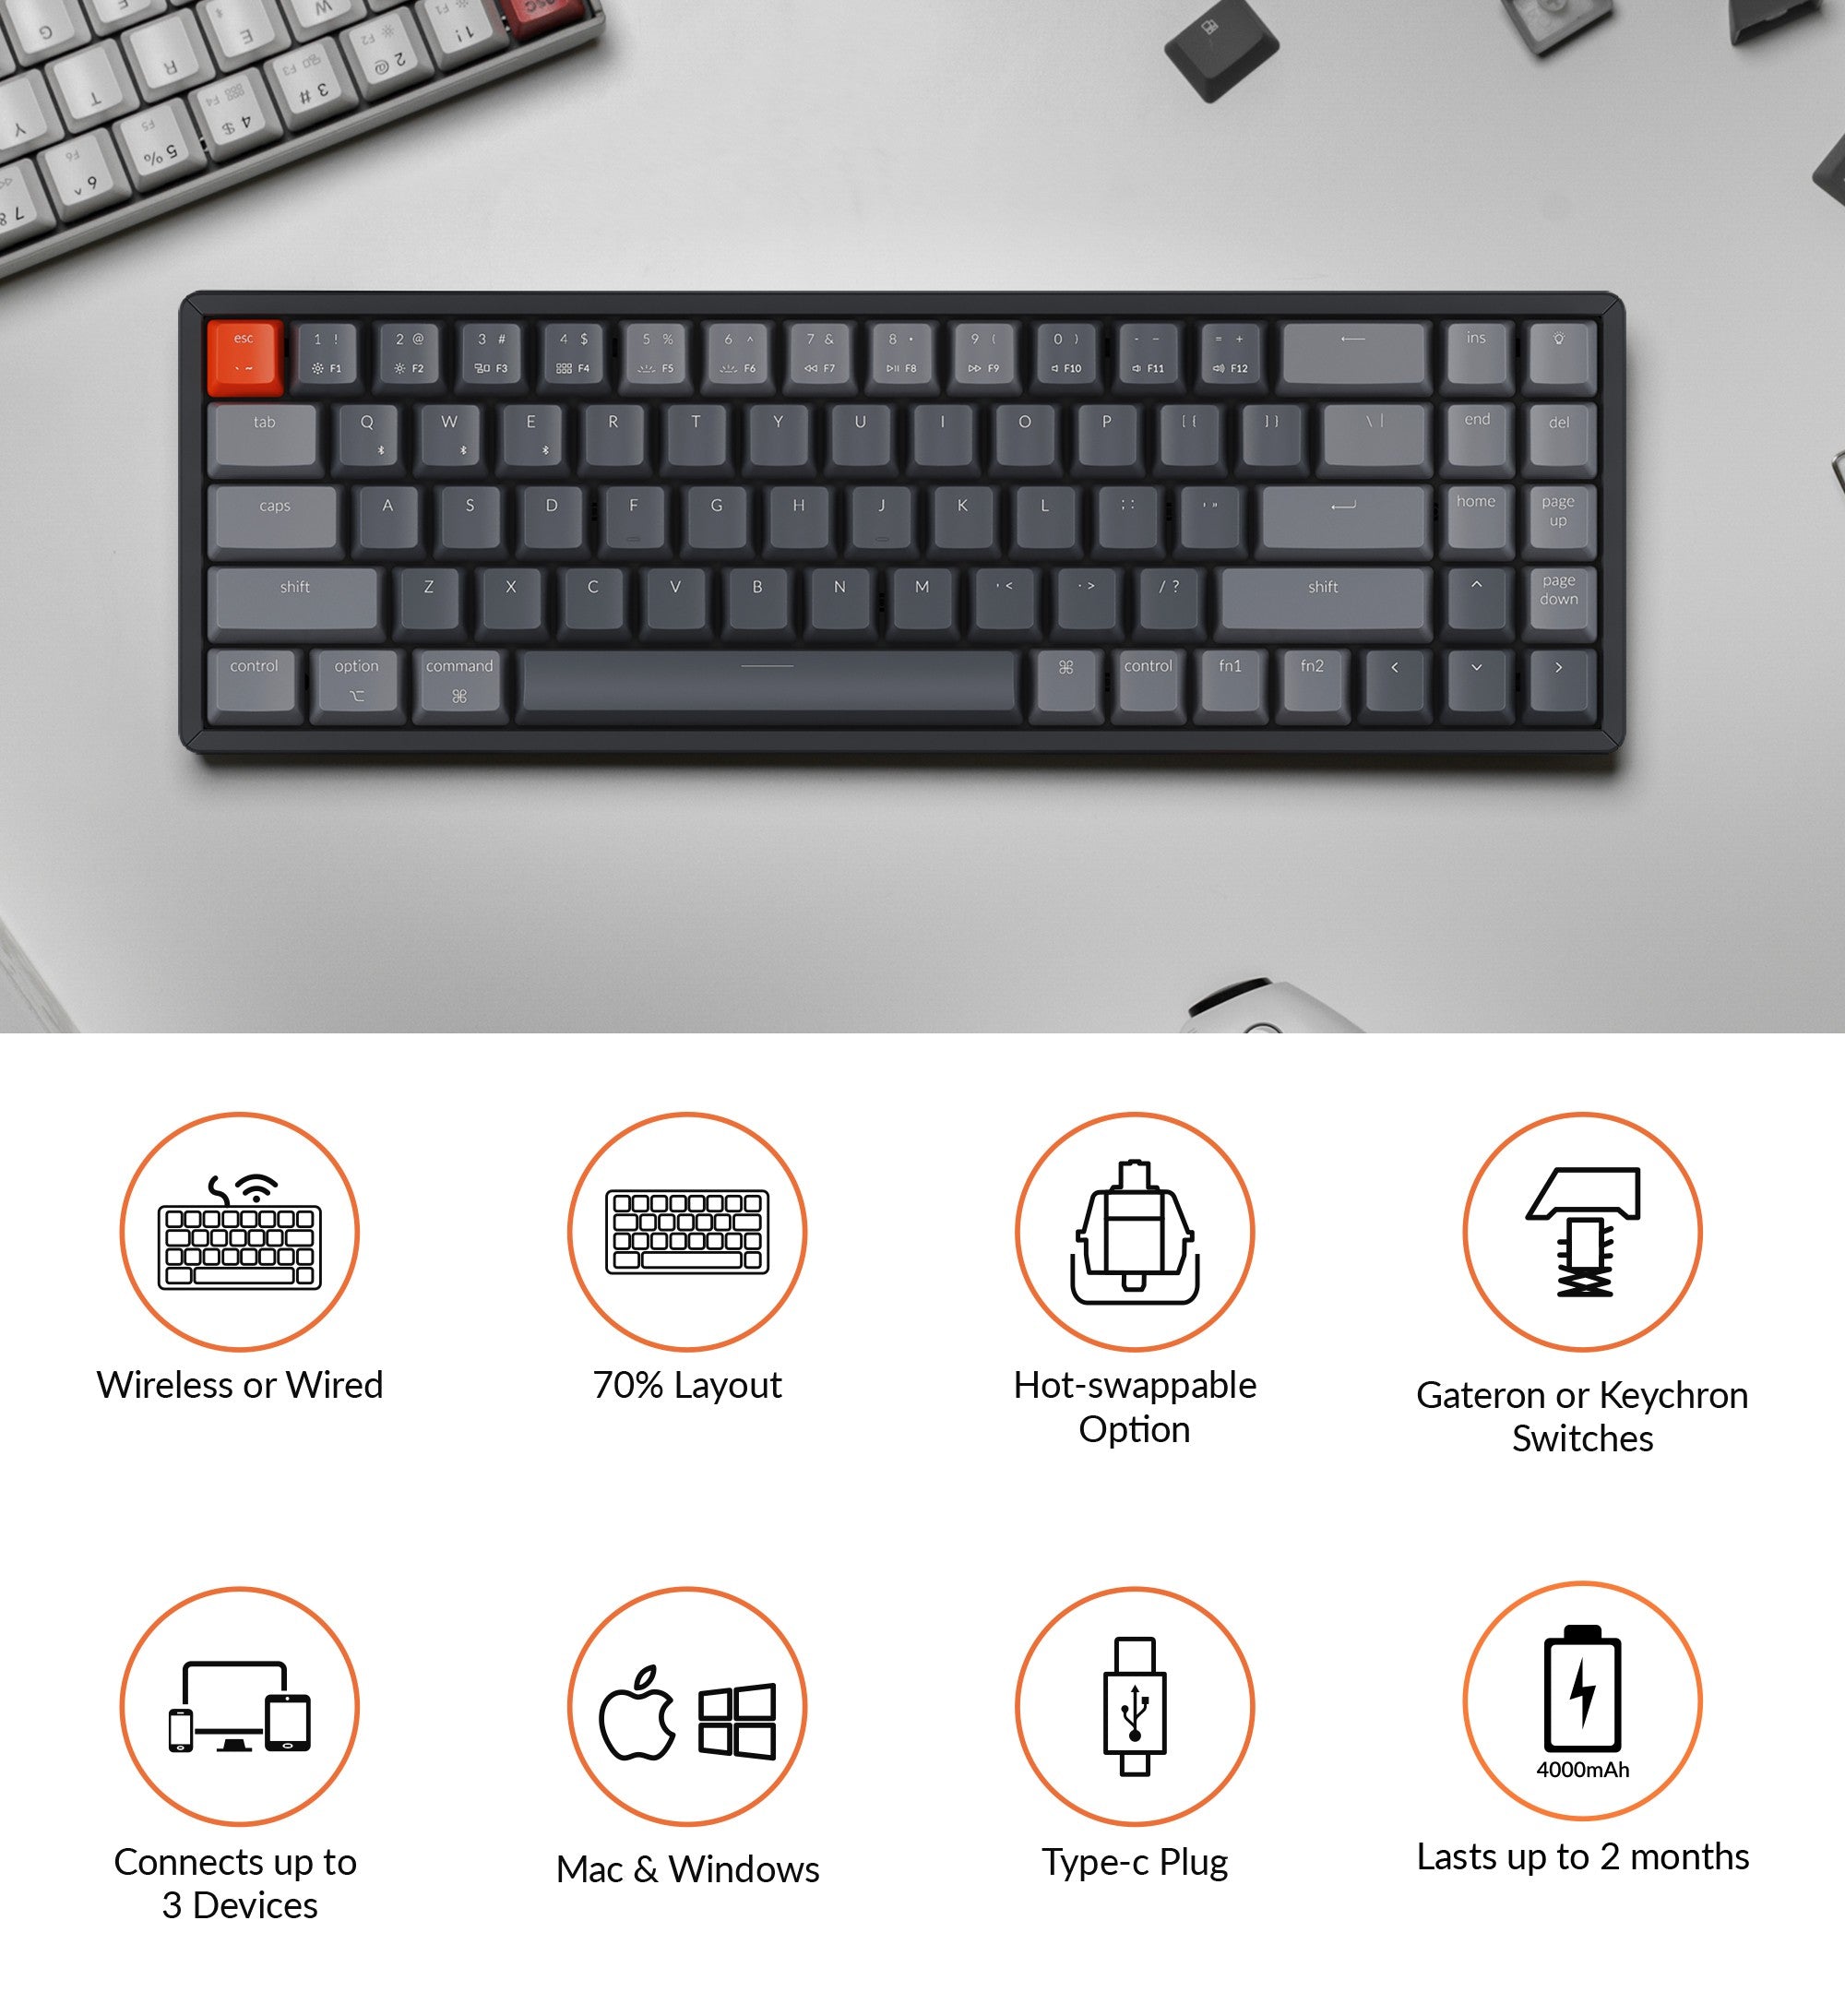 Keychron K12 60% compact hot-swappable wireless mechanical keyboard with aluminum frame for Mac and Windows with White RGB backlight Keychron Lava optical switch and Keychron Mechanical Switch and Gateron Mechanical switch